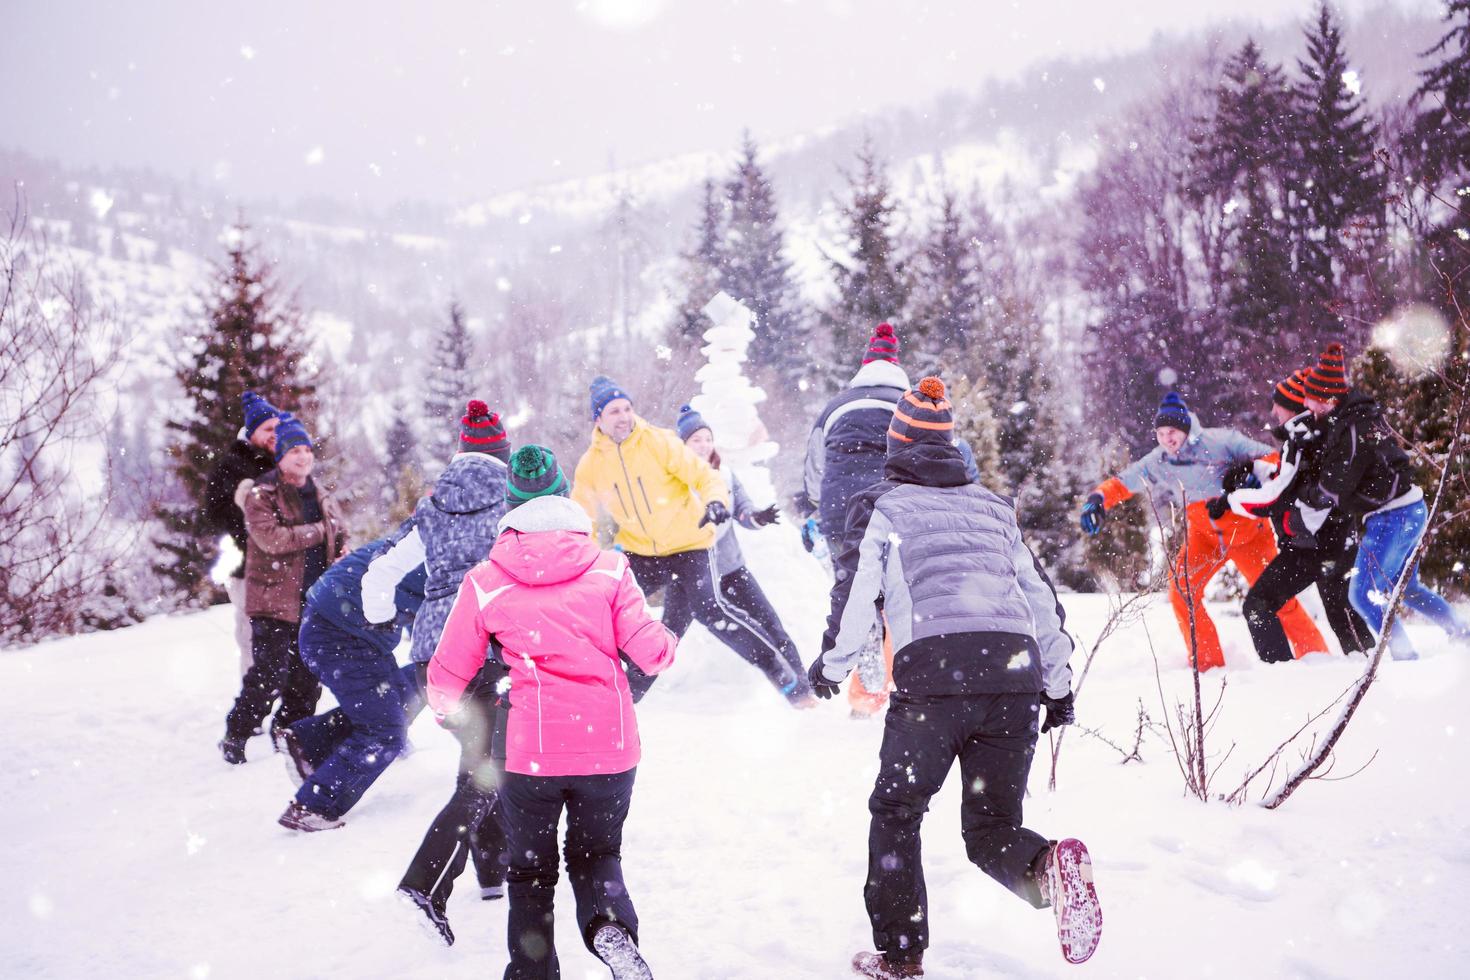 group of young people having fun in beautiful winter landscape photo